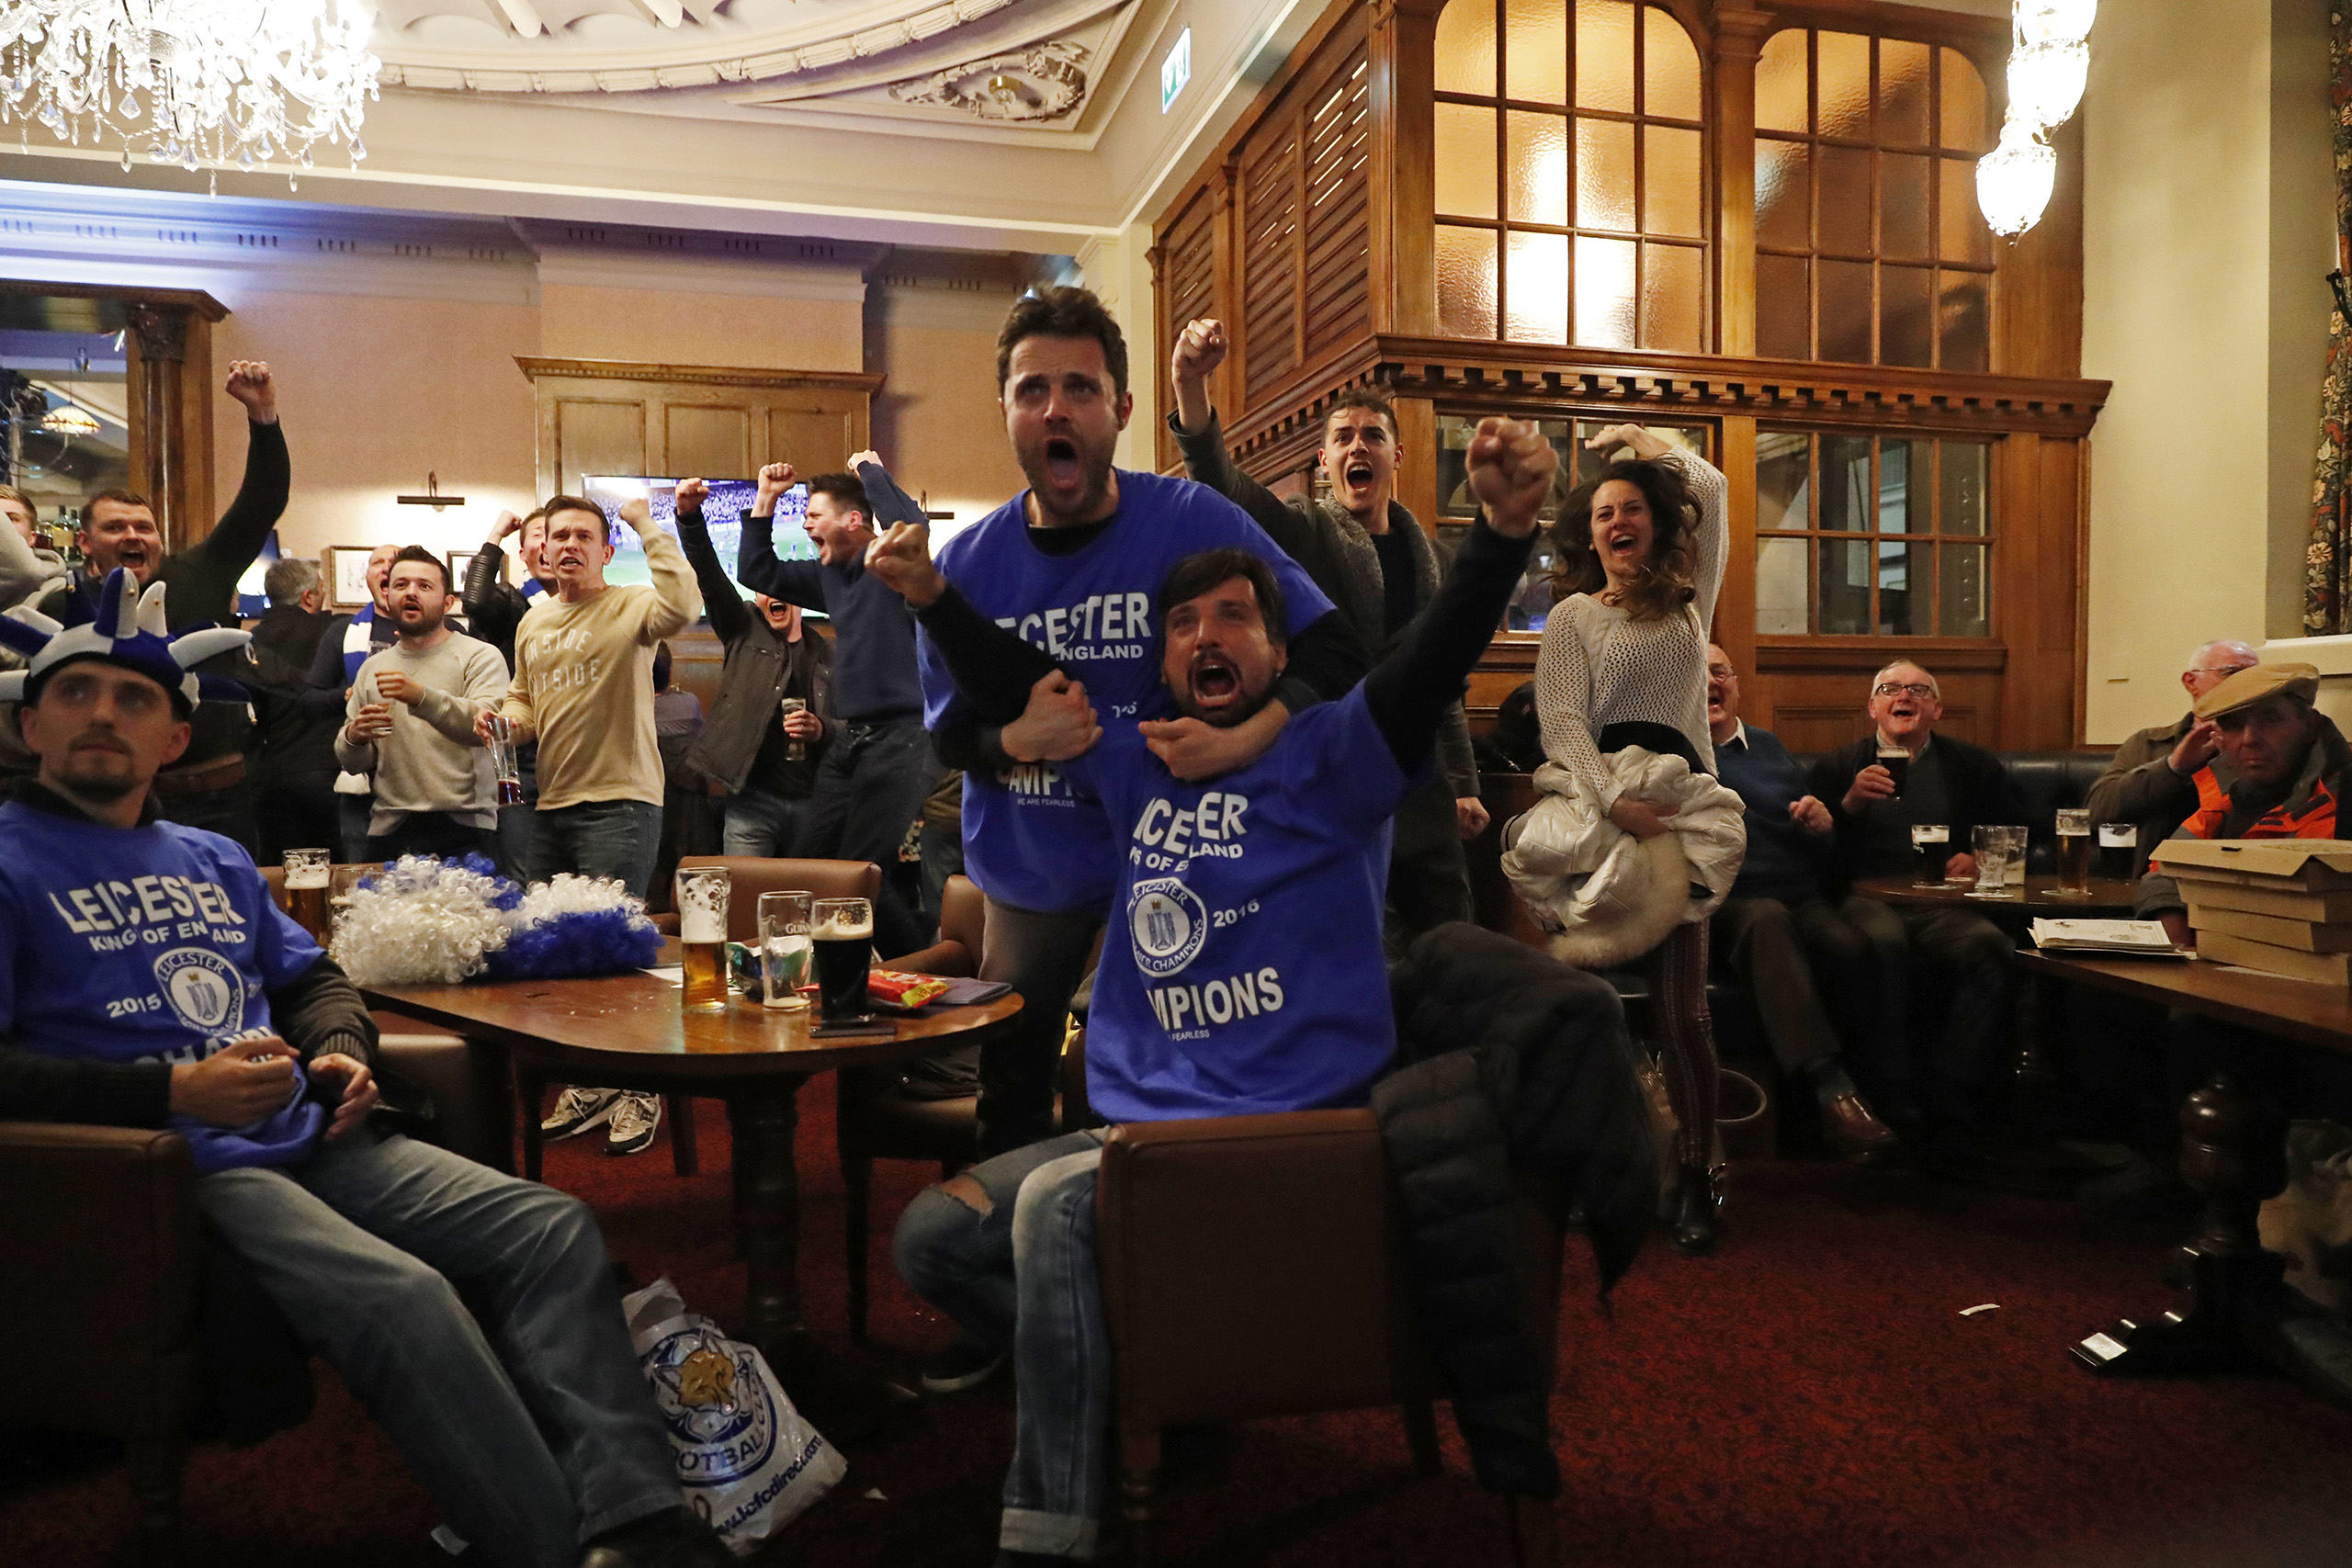 Leicester City fans celebrate after Chelsea's first goal against Tottenham Hotspur at a pub in Leicester, eastern England, May 2, 2016. (Eddie Keogh—Reuters)